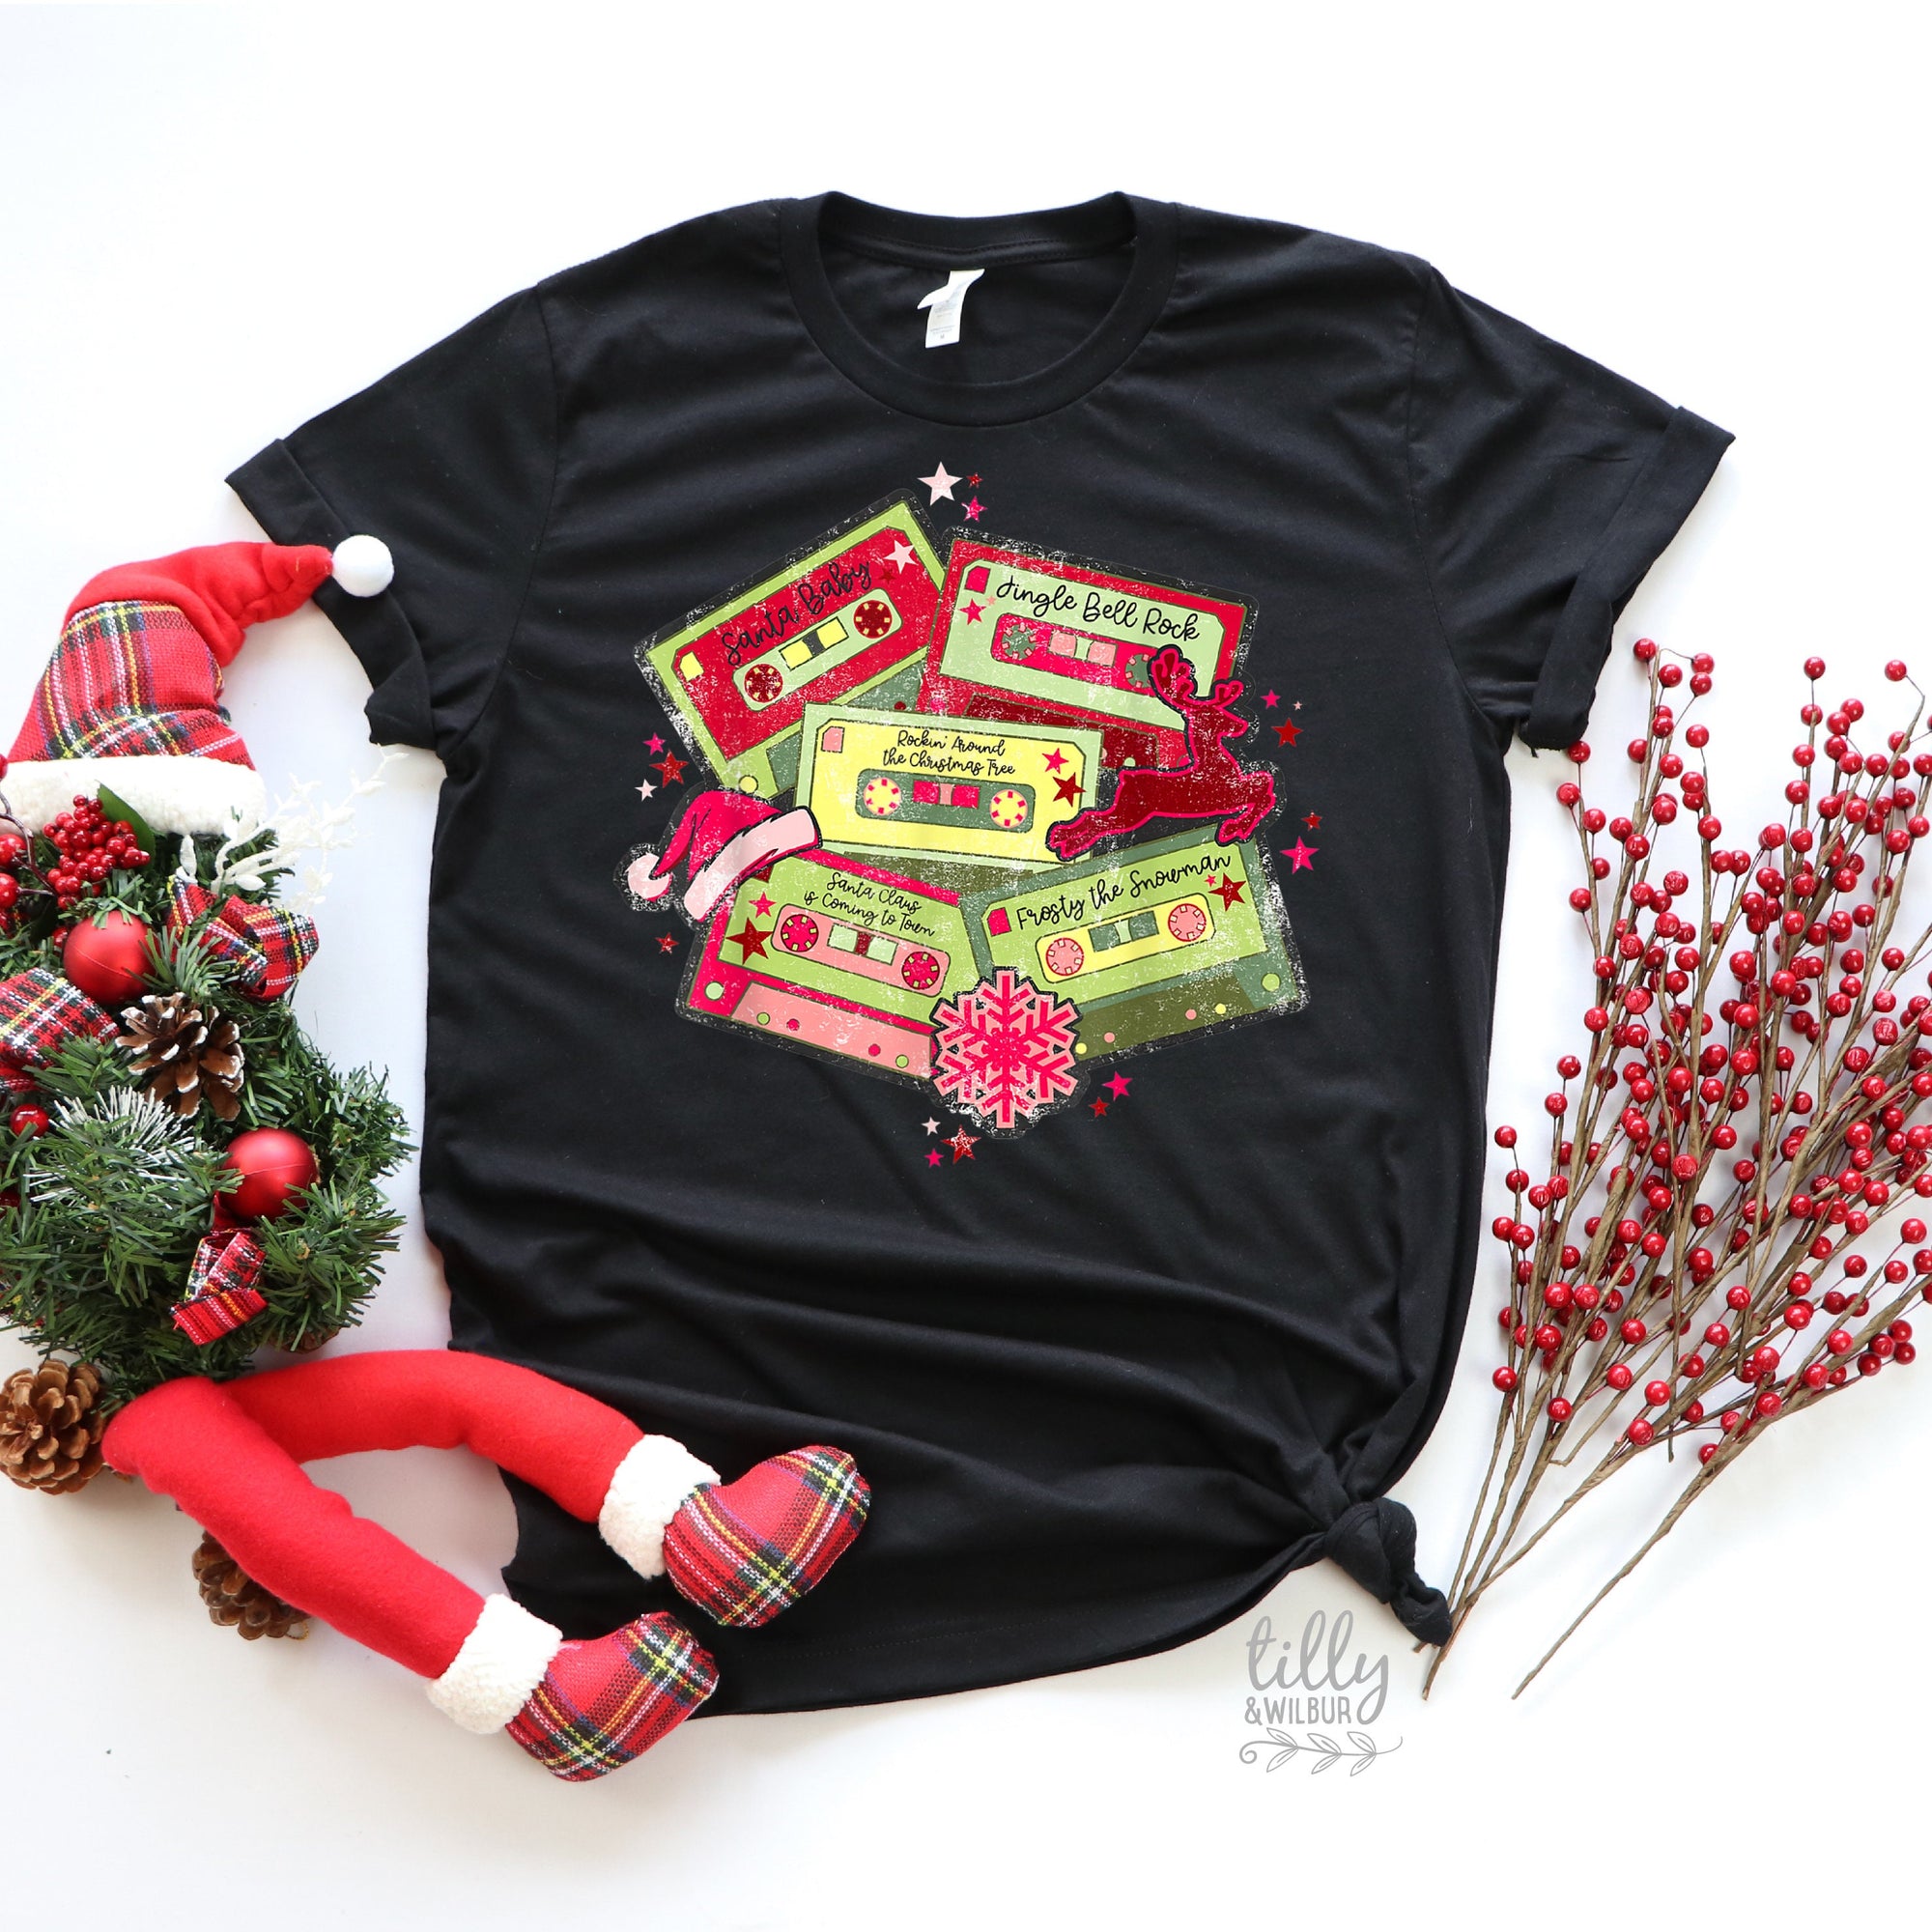 Christmas Cassettes T-Shirt, Christmas Music T-Shirt, Mix Tape T-Shirts, Family Holiday Tee, Baby, Child, Women and Men's Sizing, Xmas Gifts